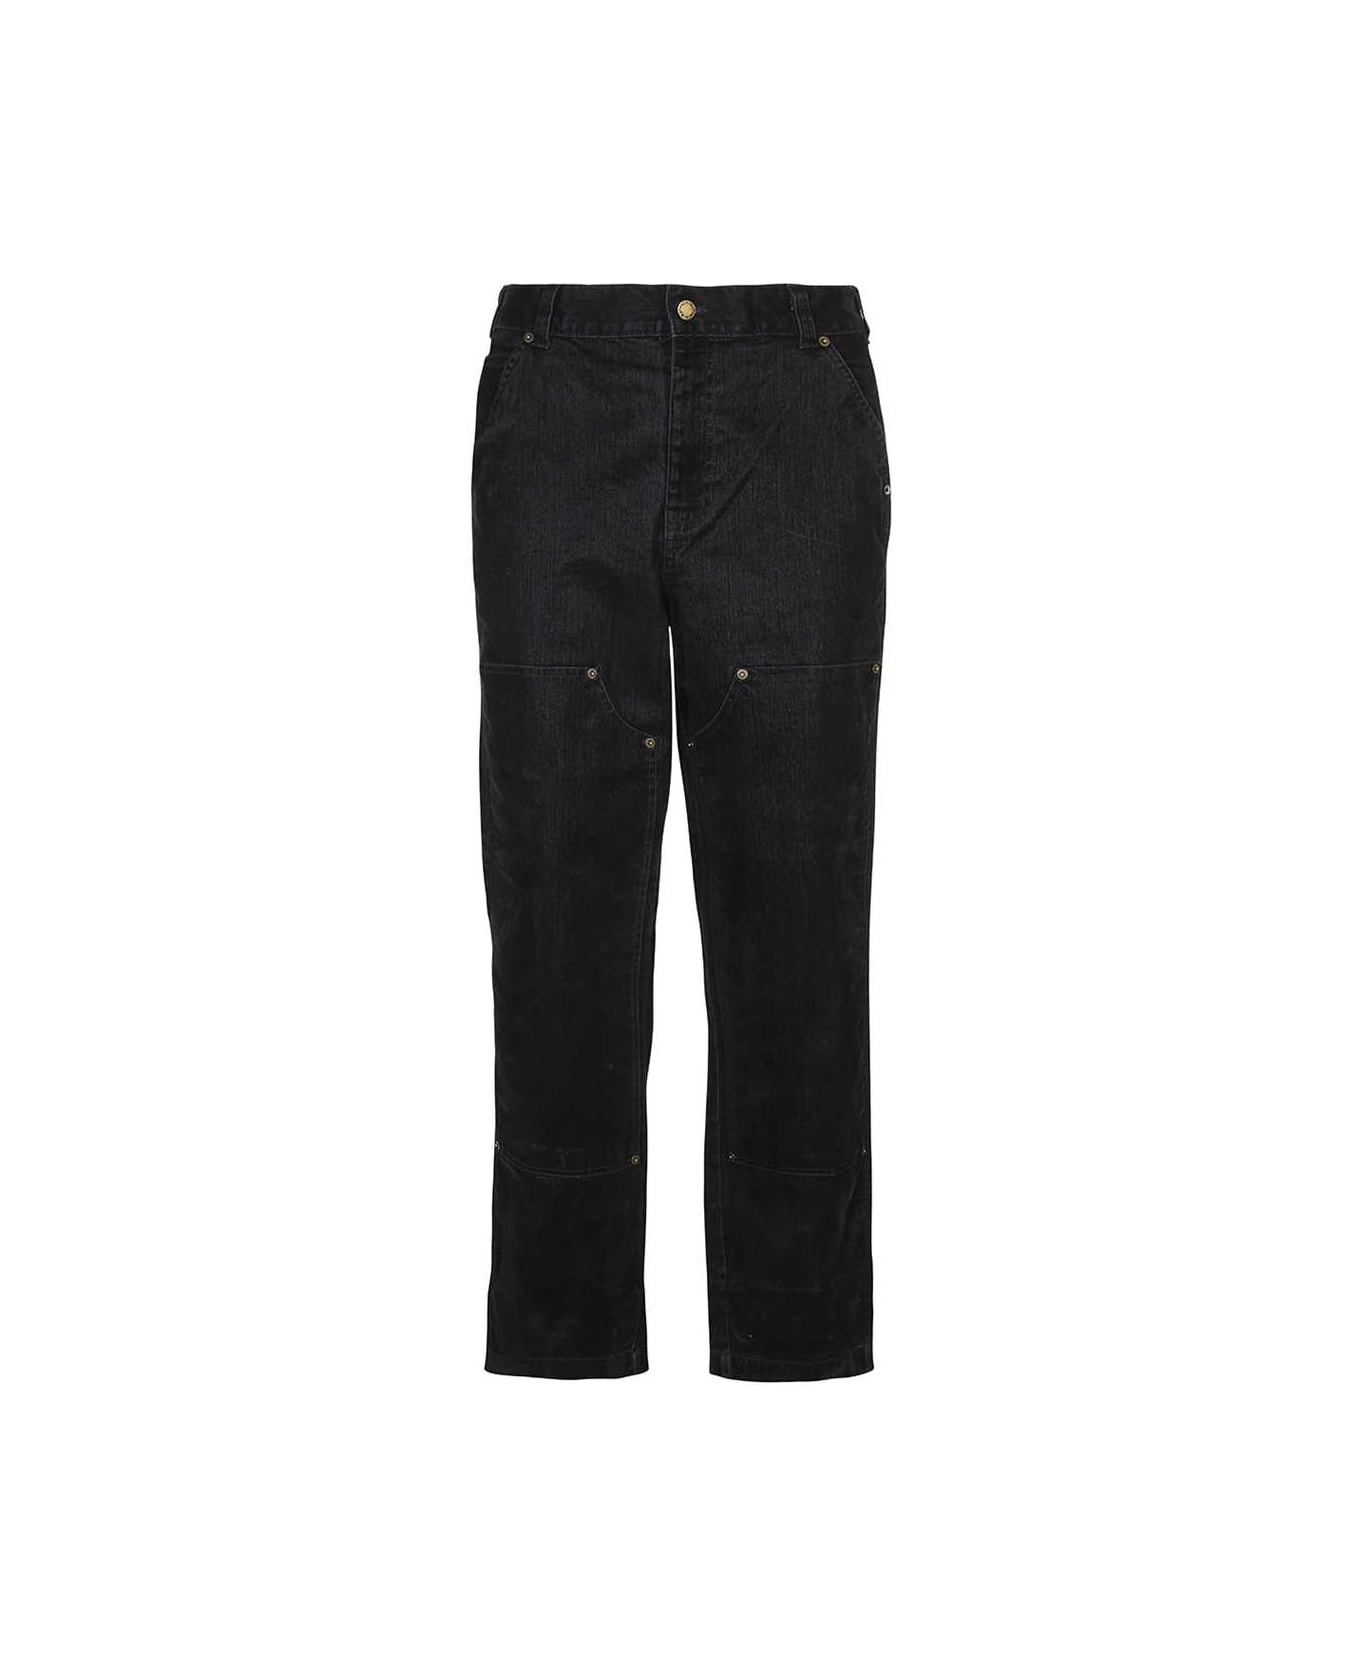 Dickies Cotton Trousers - black ボトムス